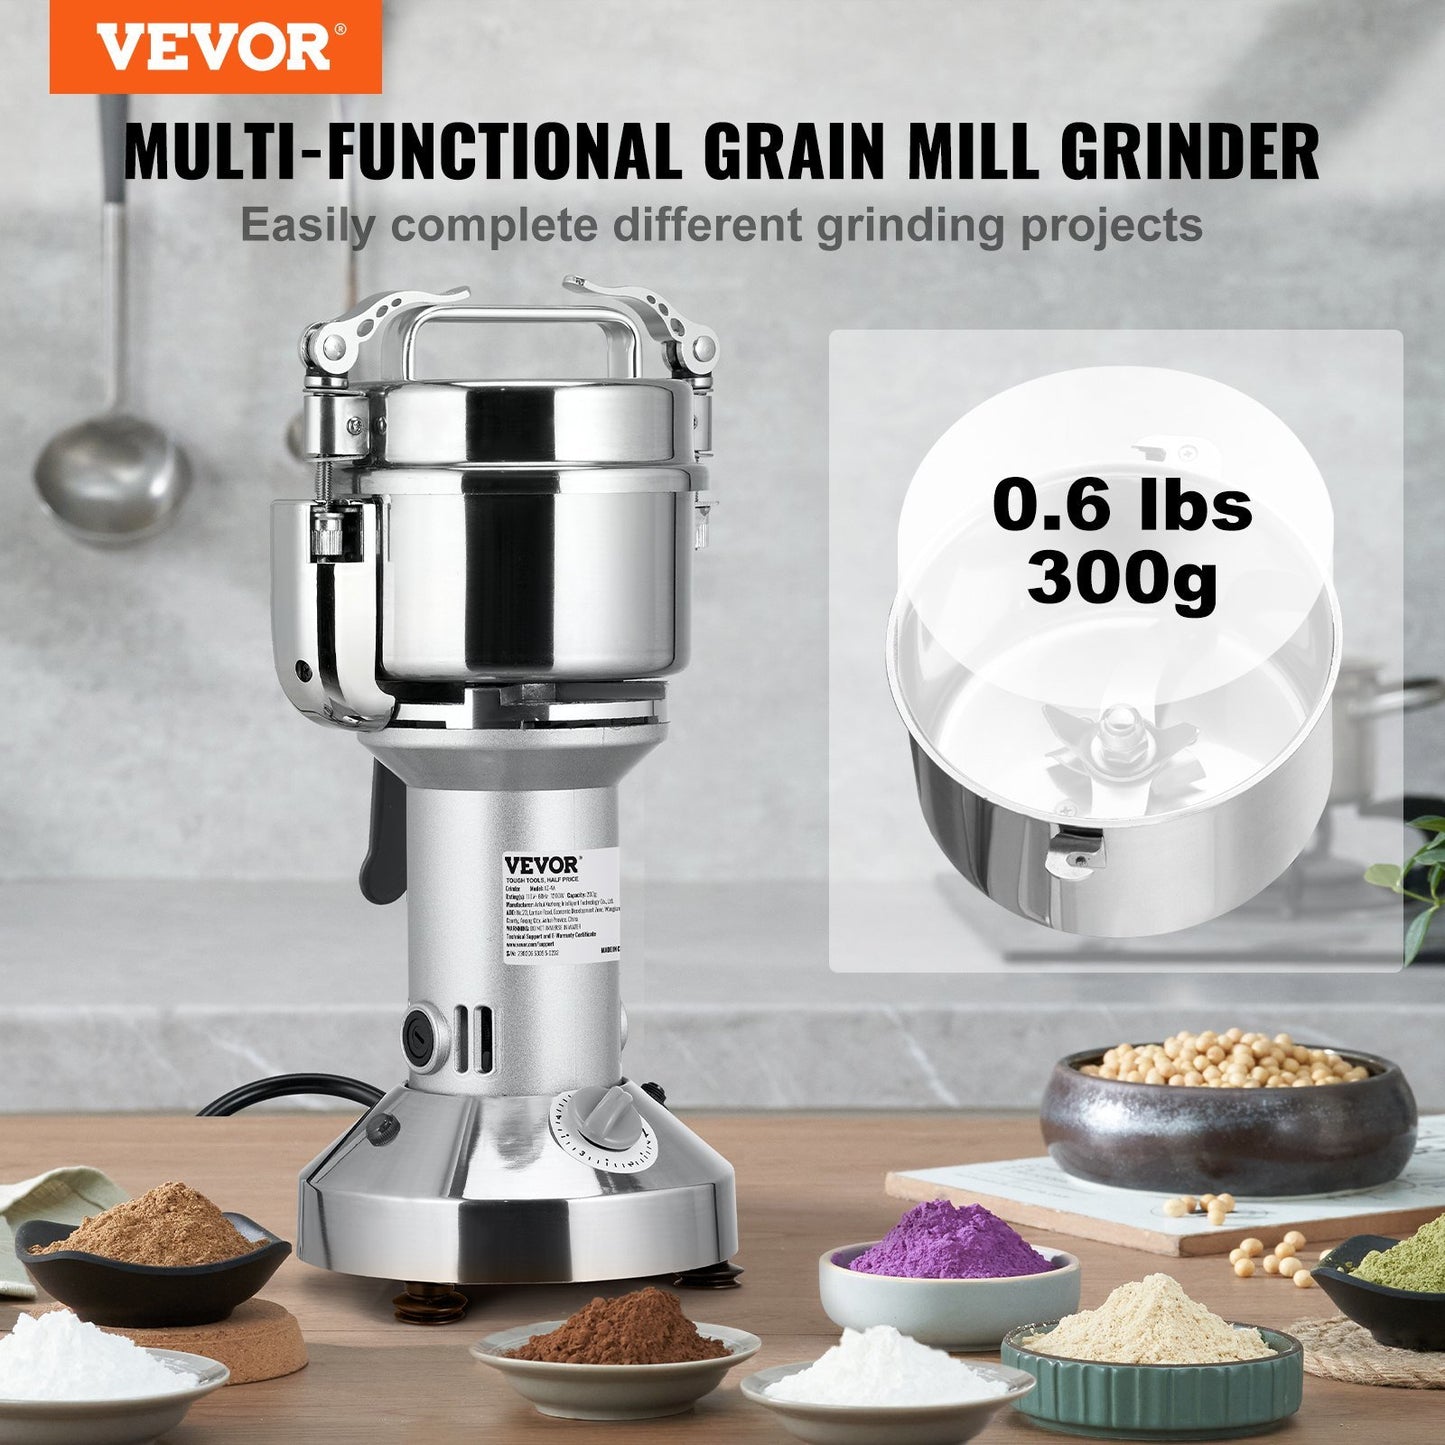 VEVOR 300g Electric Grain Mill Grinder, High Speed 1900W Commercial Spice Grinders, Stainless Steel Pulverizer Powder Machine, for Dry Herbs Grains Spices Cereals Coffee Corn Pepper, Straight Type